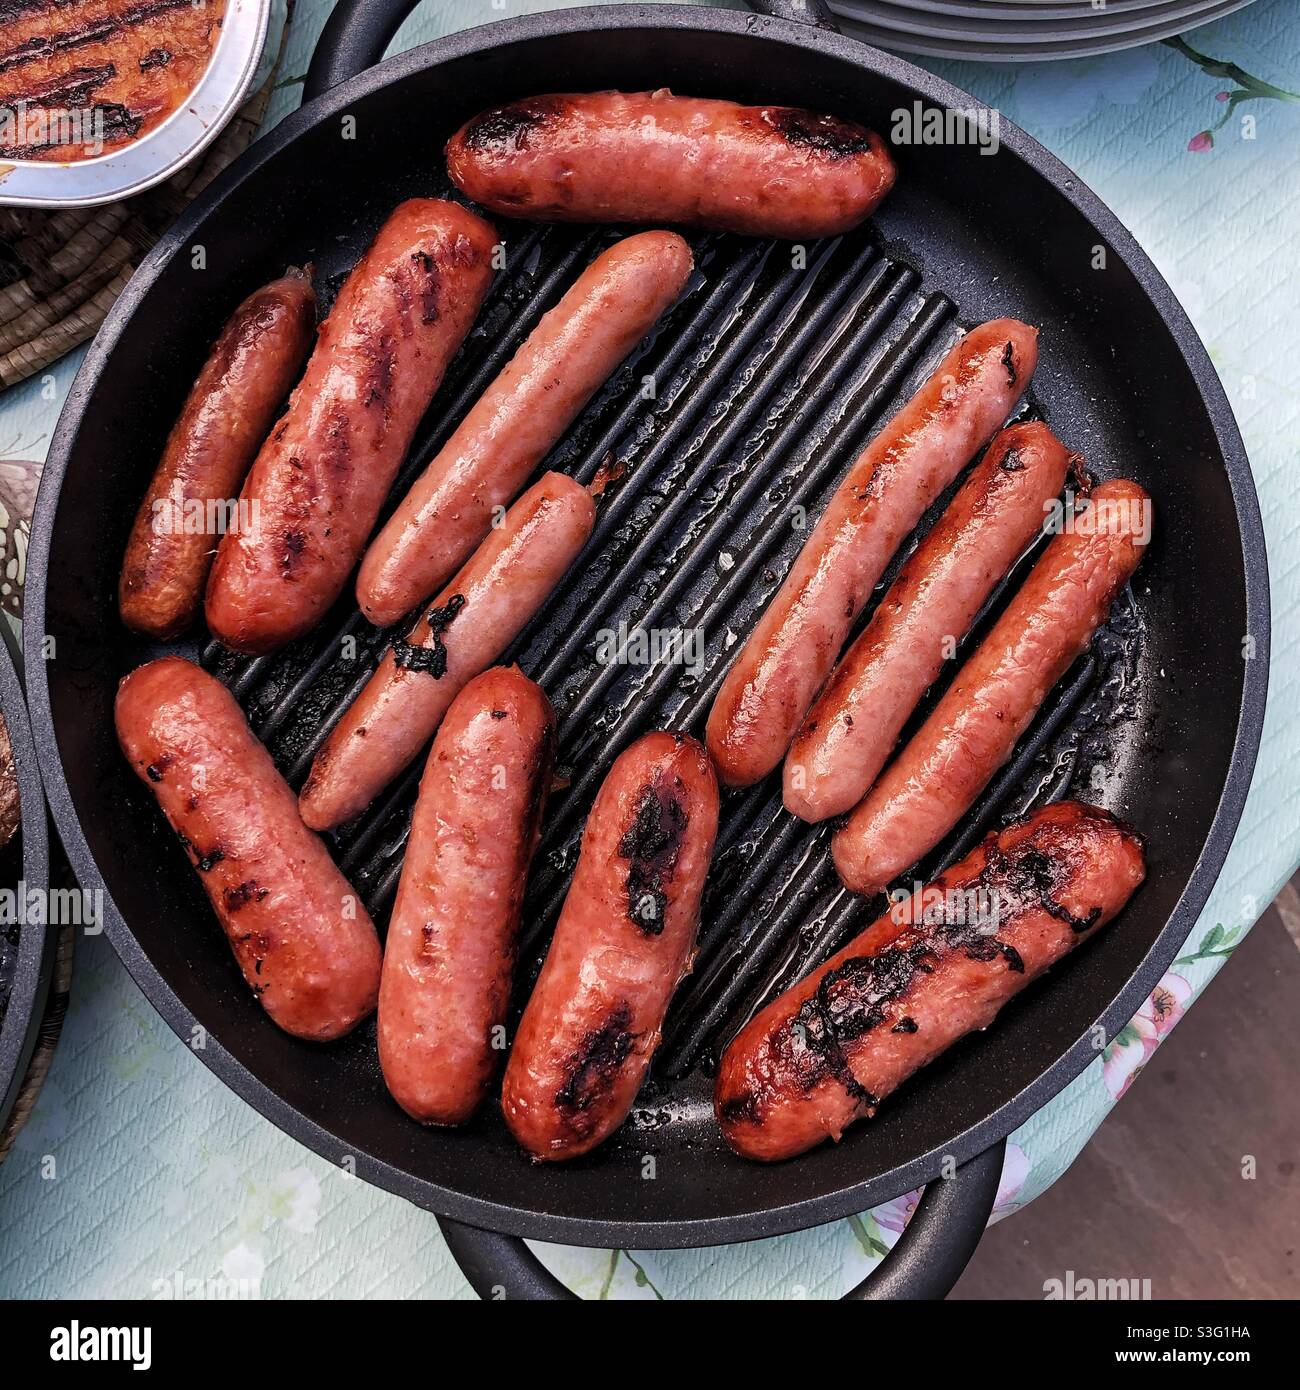 Sizzling sausages in a griddle frying pan Stock Photo